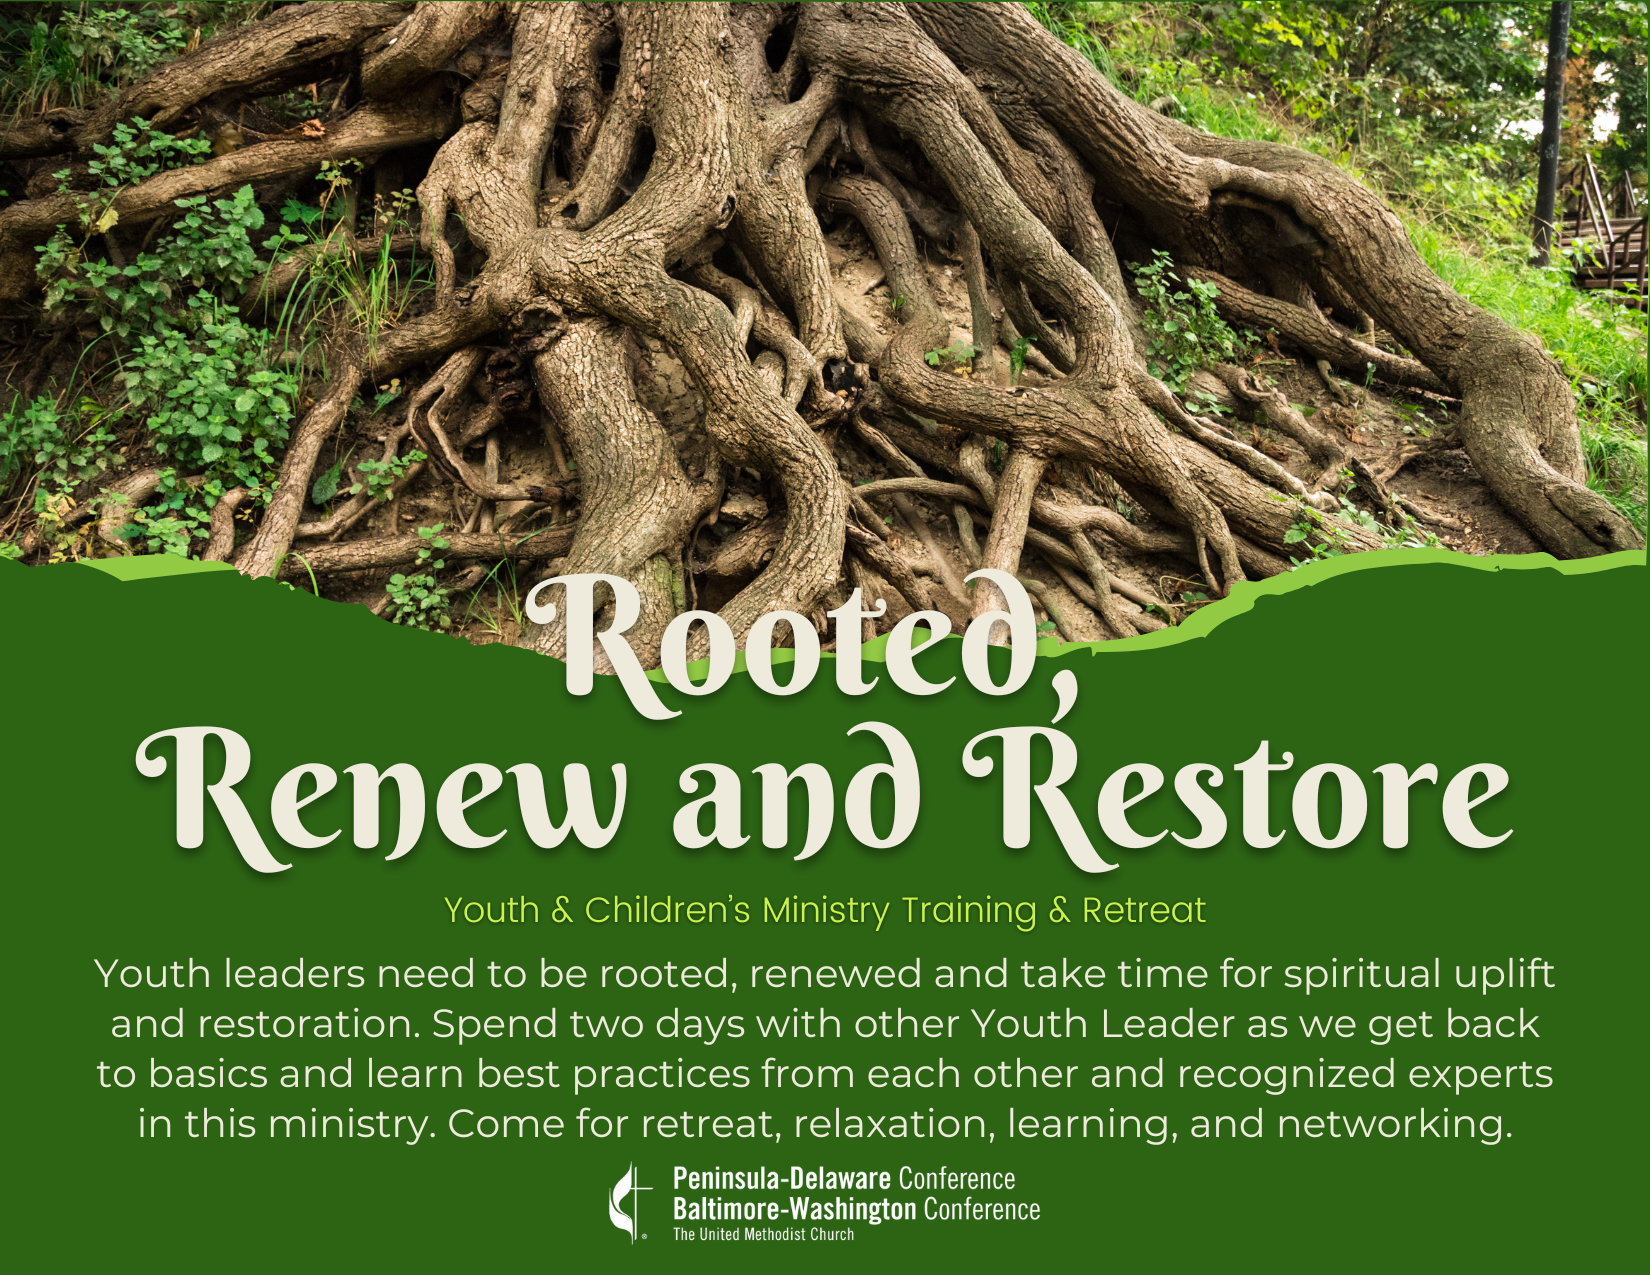 Rooted, Renew and Restore: Youth & Children's Ministry Conference 2023